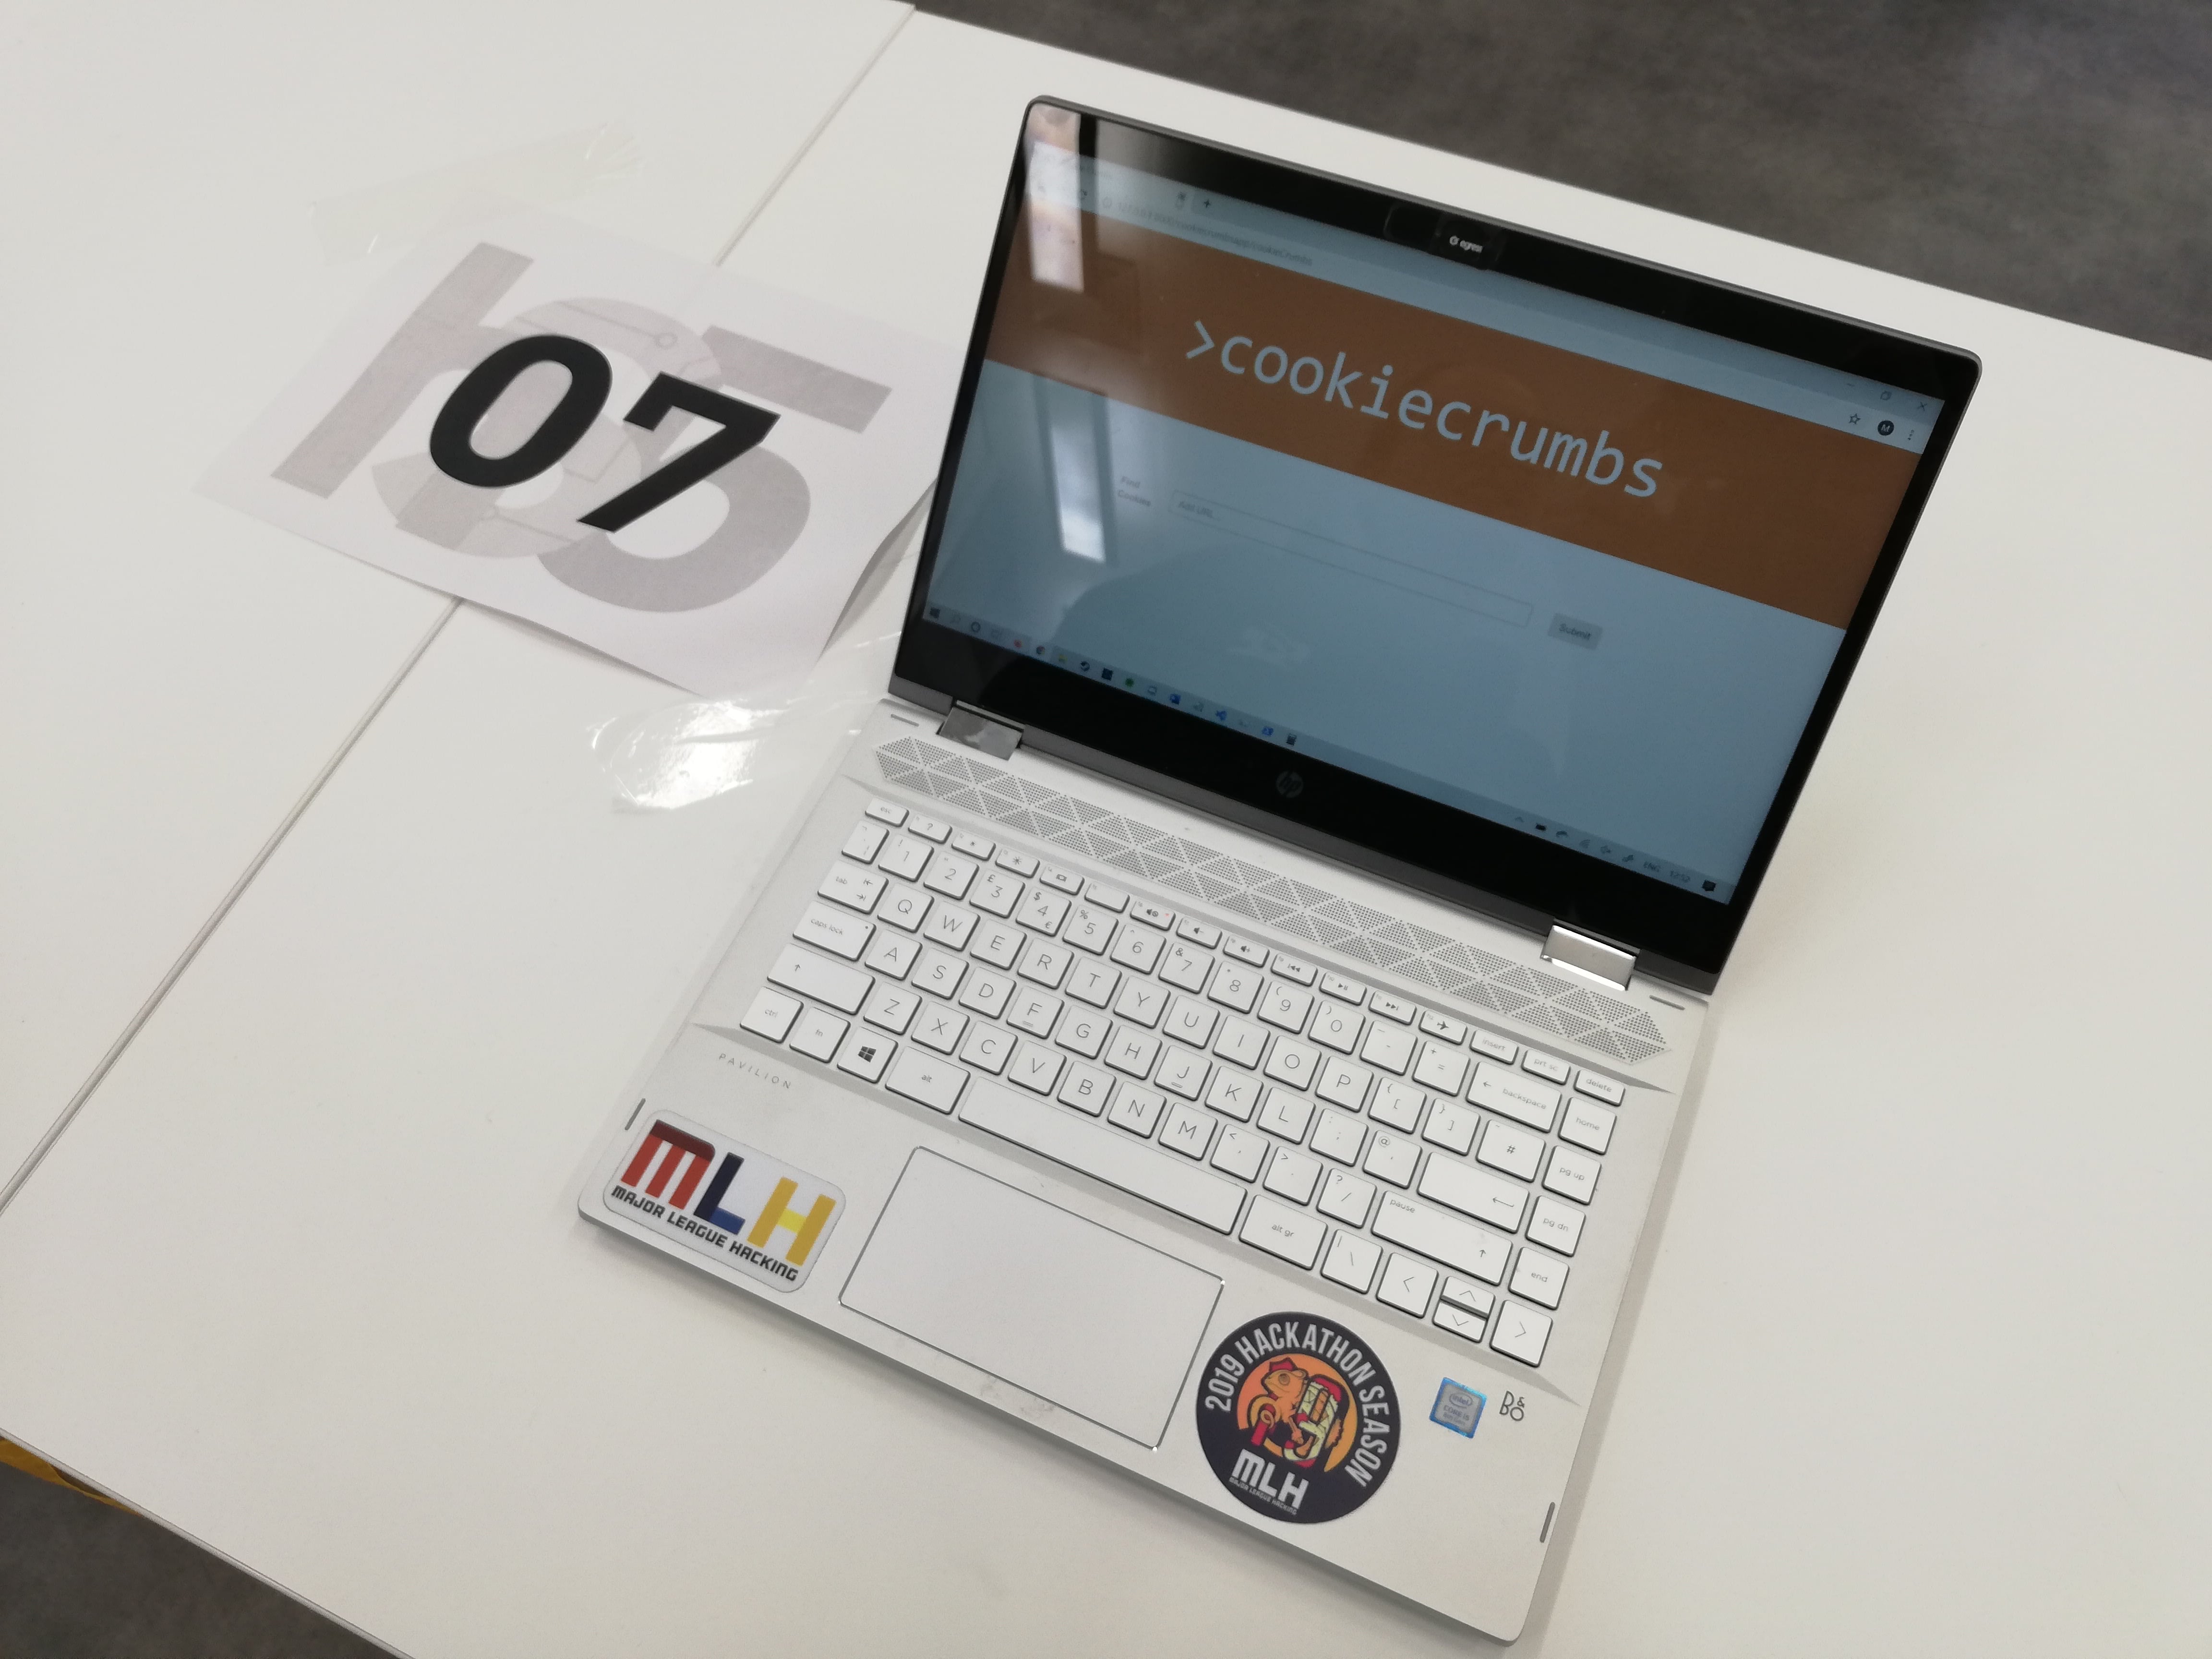 A laptop on a table, displaying a website called 'Cookie Crumbs'